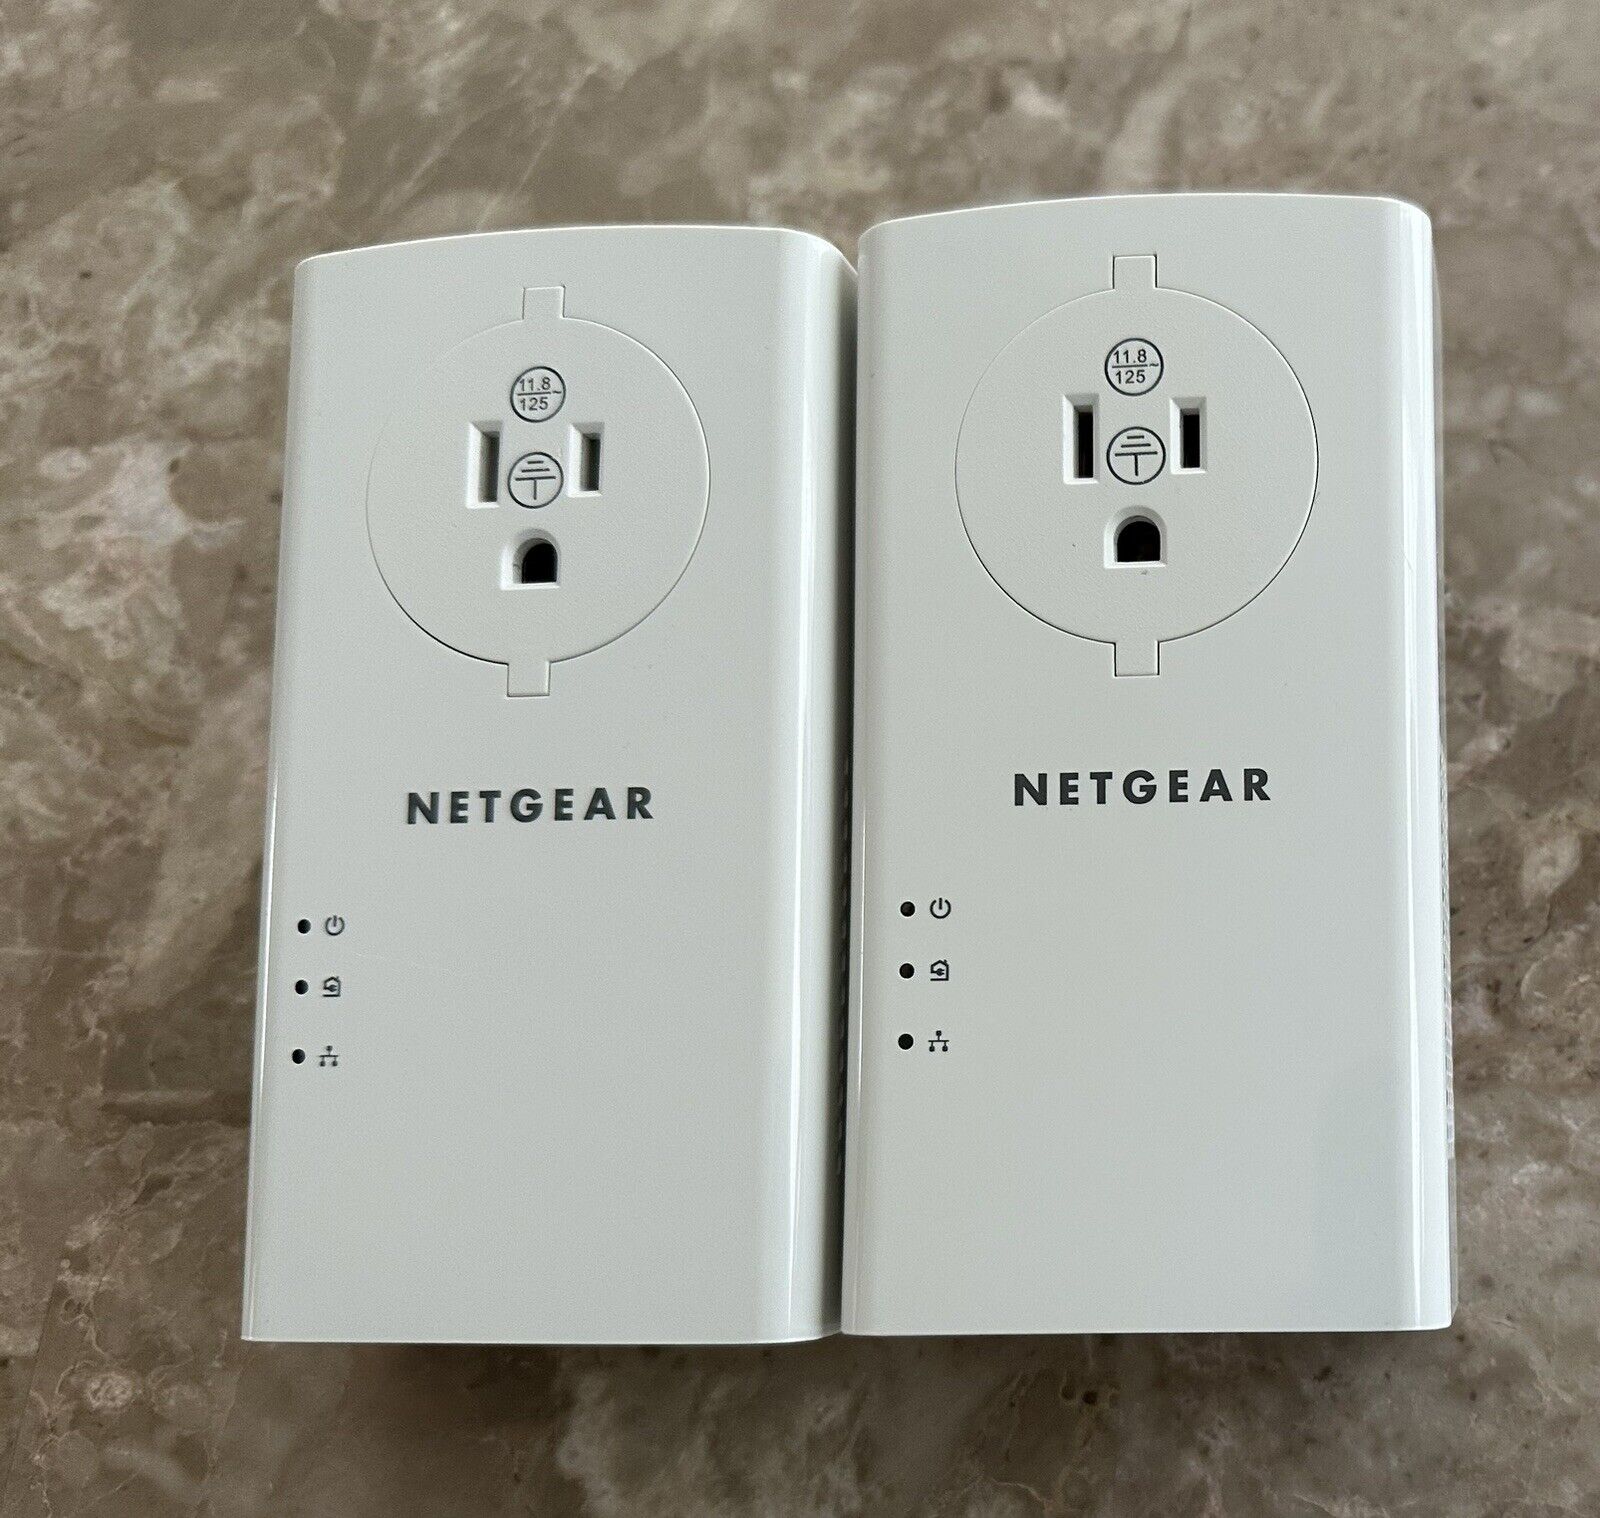 NETGEAR Powerline, 2000 Mbps, 2 GB Ethernet Ports + Extra Outlet, PLP2000